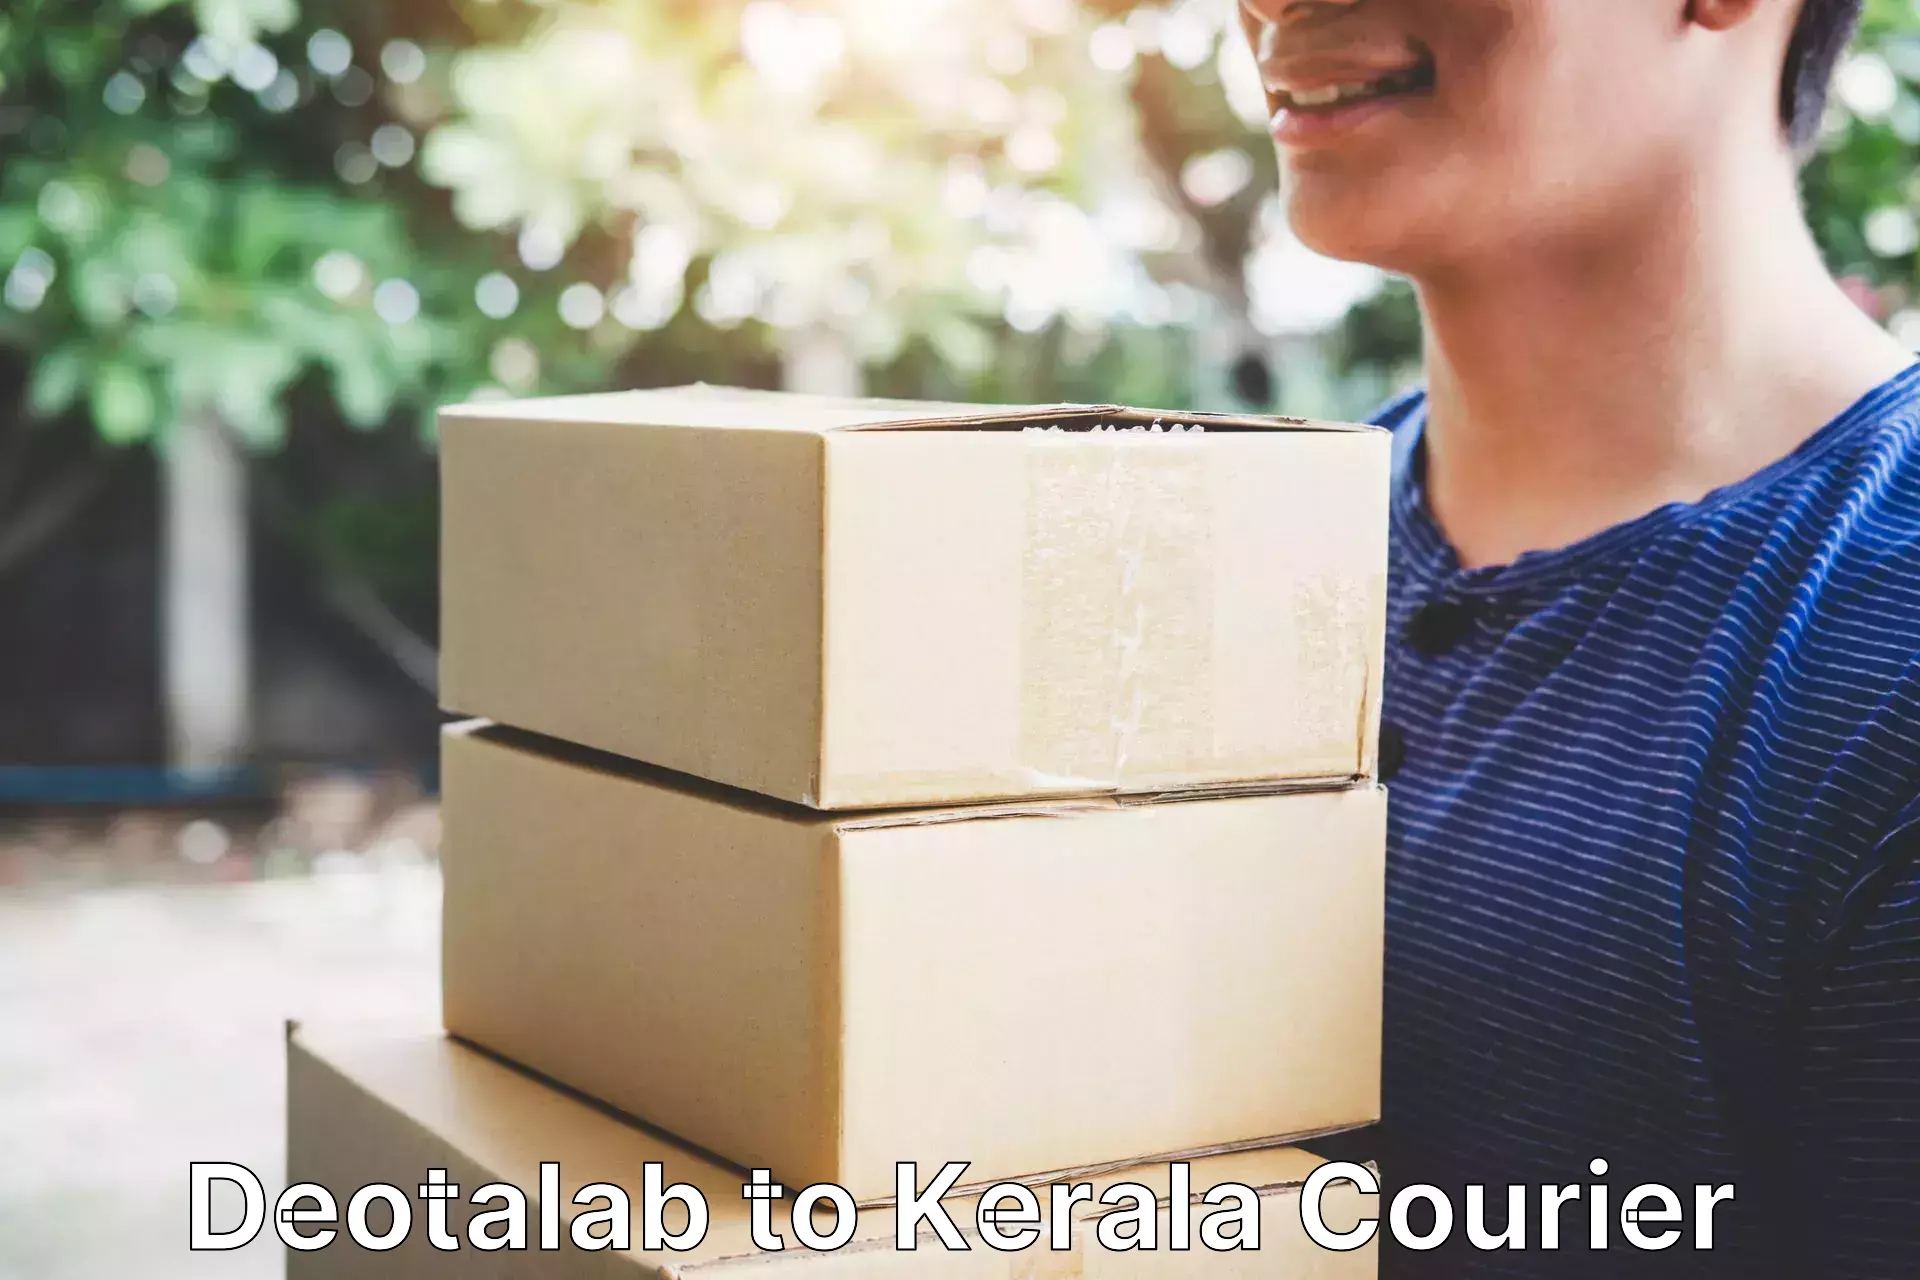 Personal parcel delivery in Deotalab to Kerala